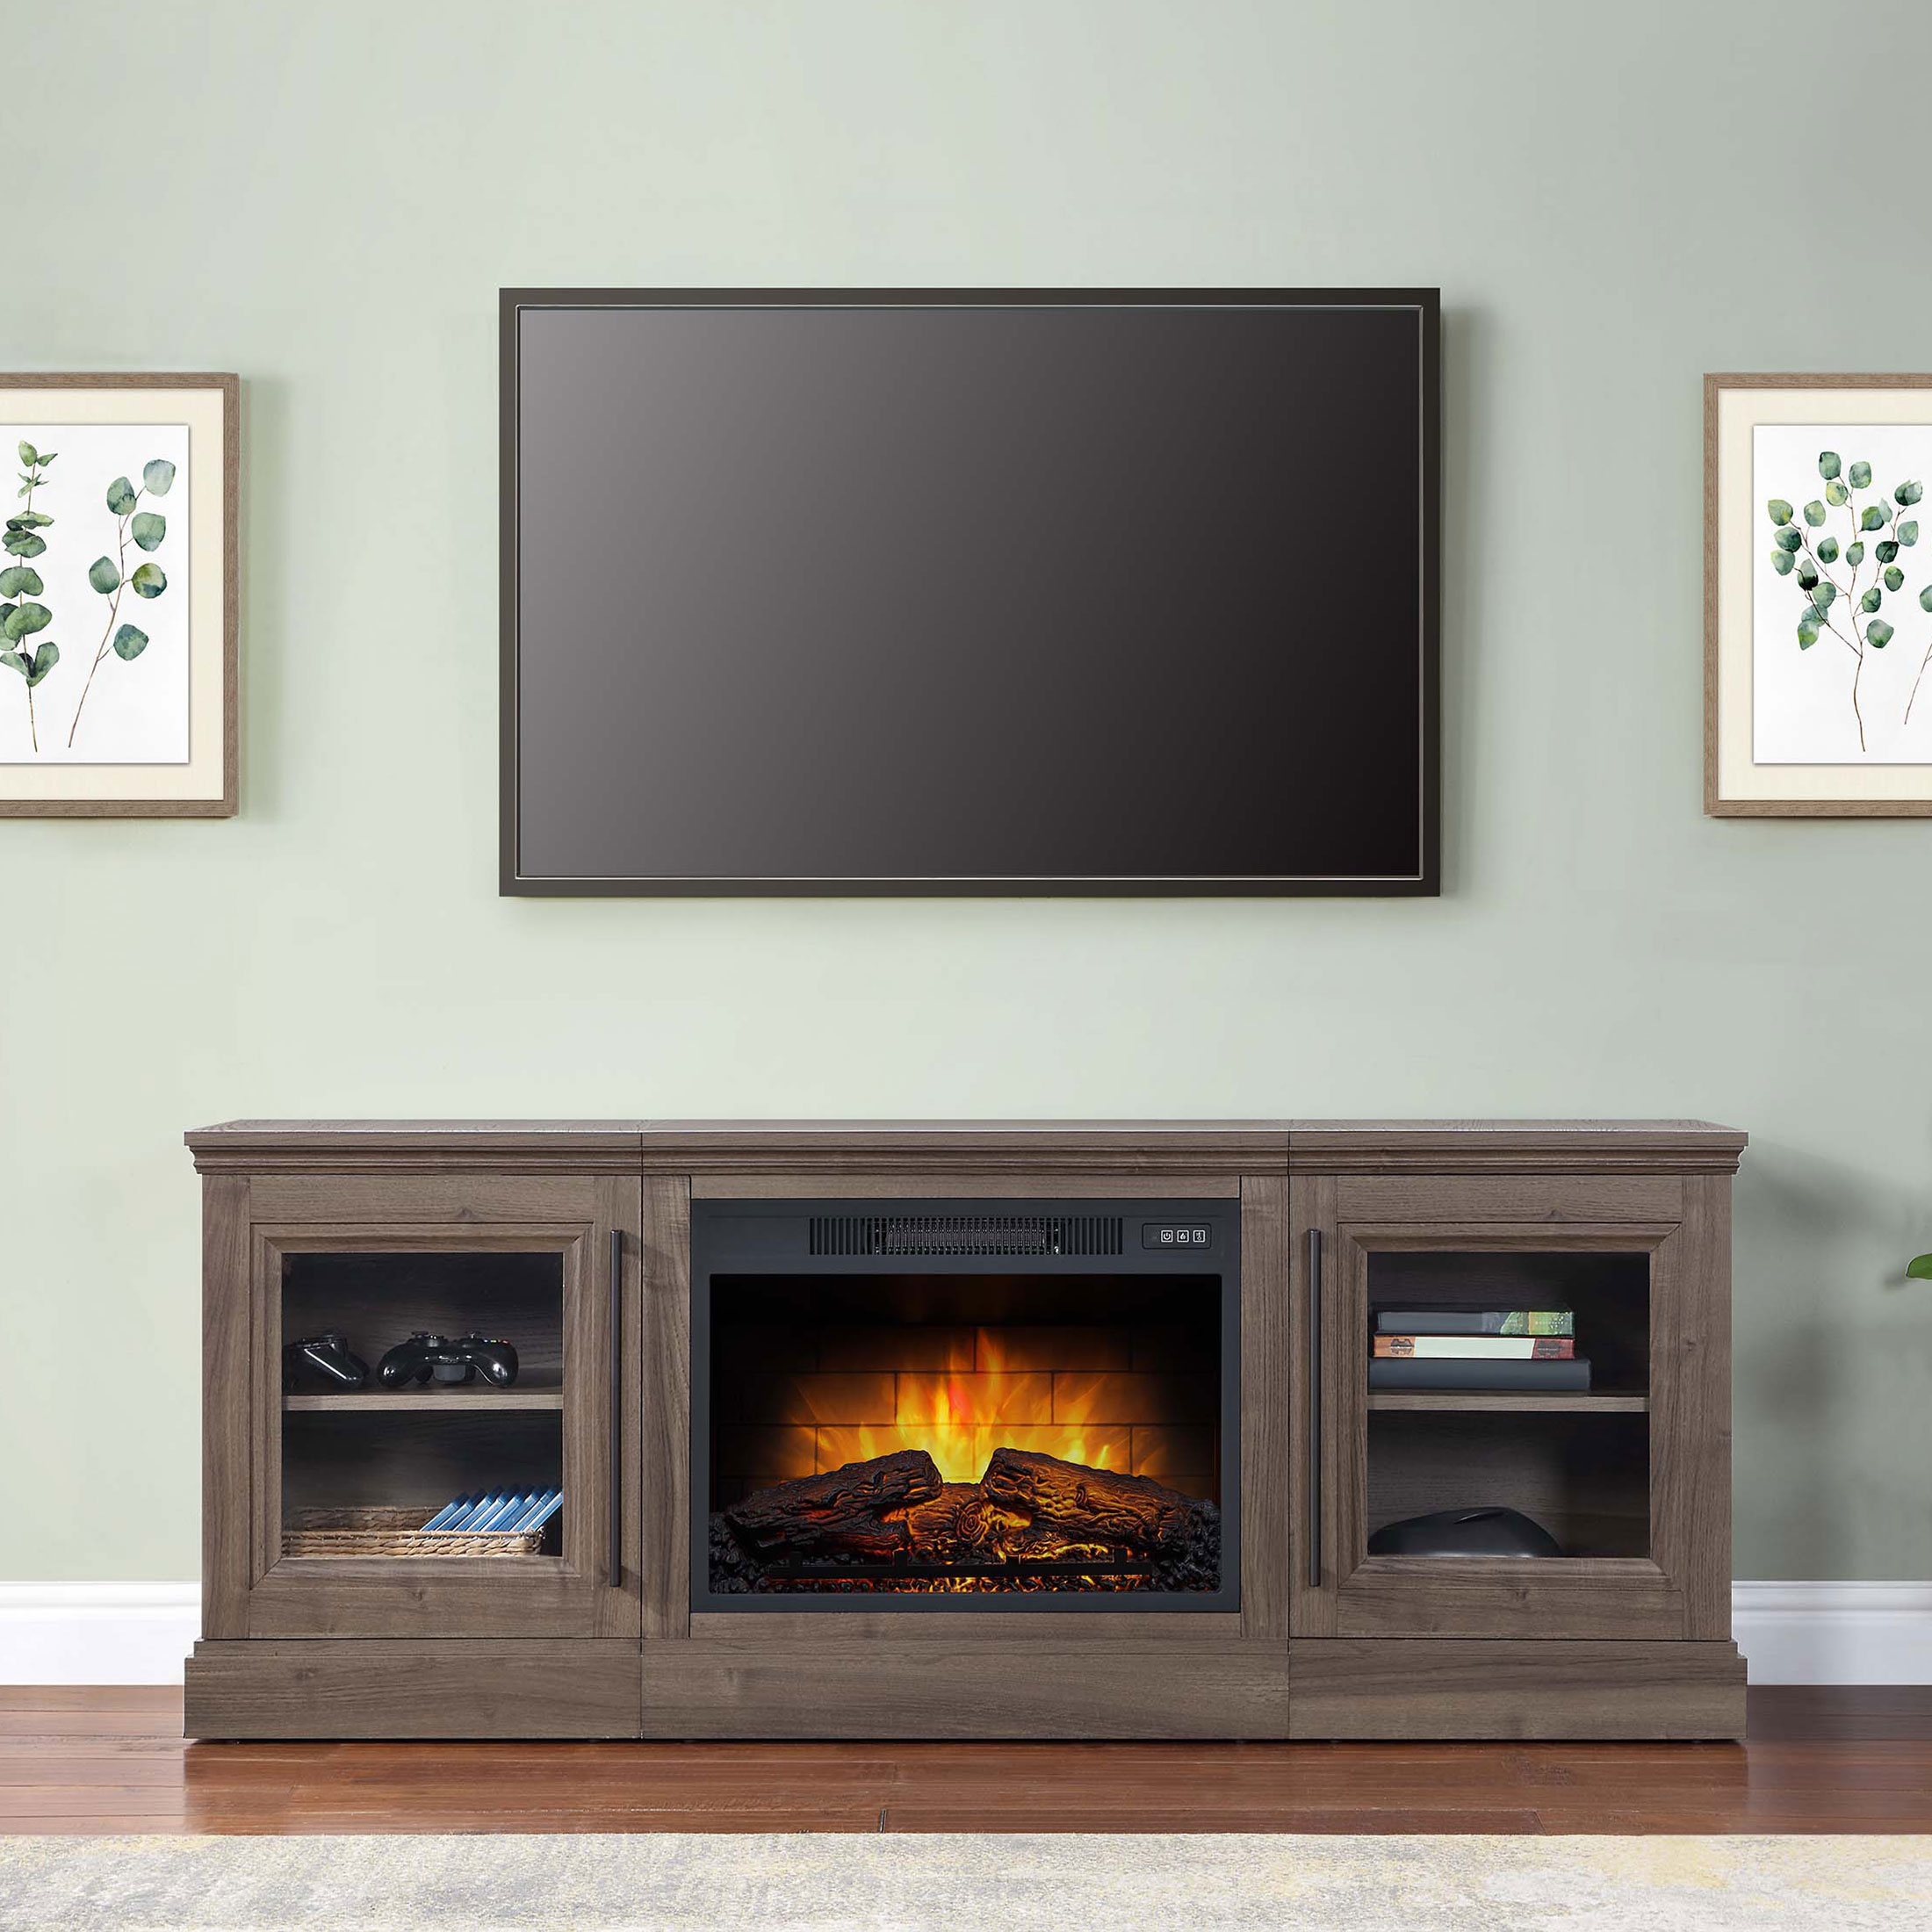 Whalen Furniture Quantum Flame Media Fireplace TV Stand for TV’s up to 75”, Walnut Brown Finish - image 5 of 12